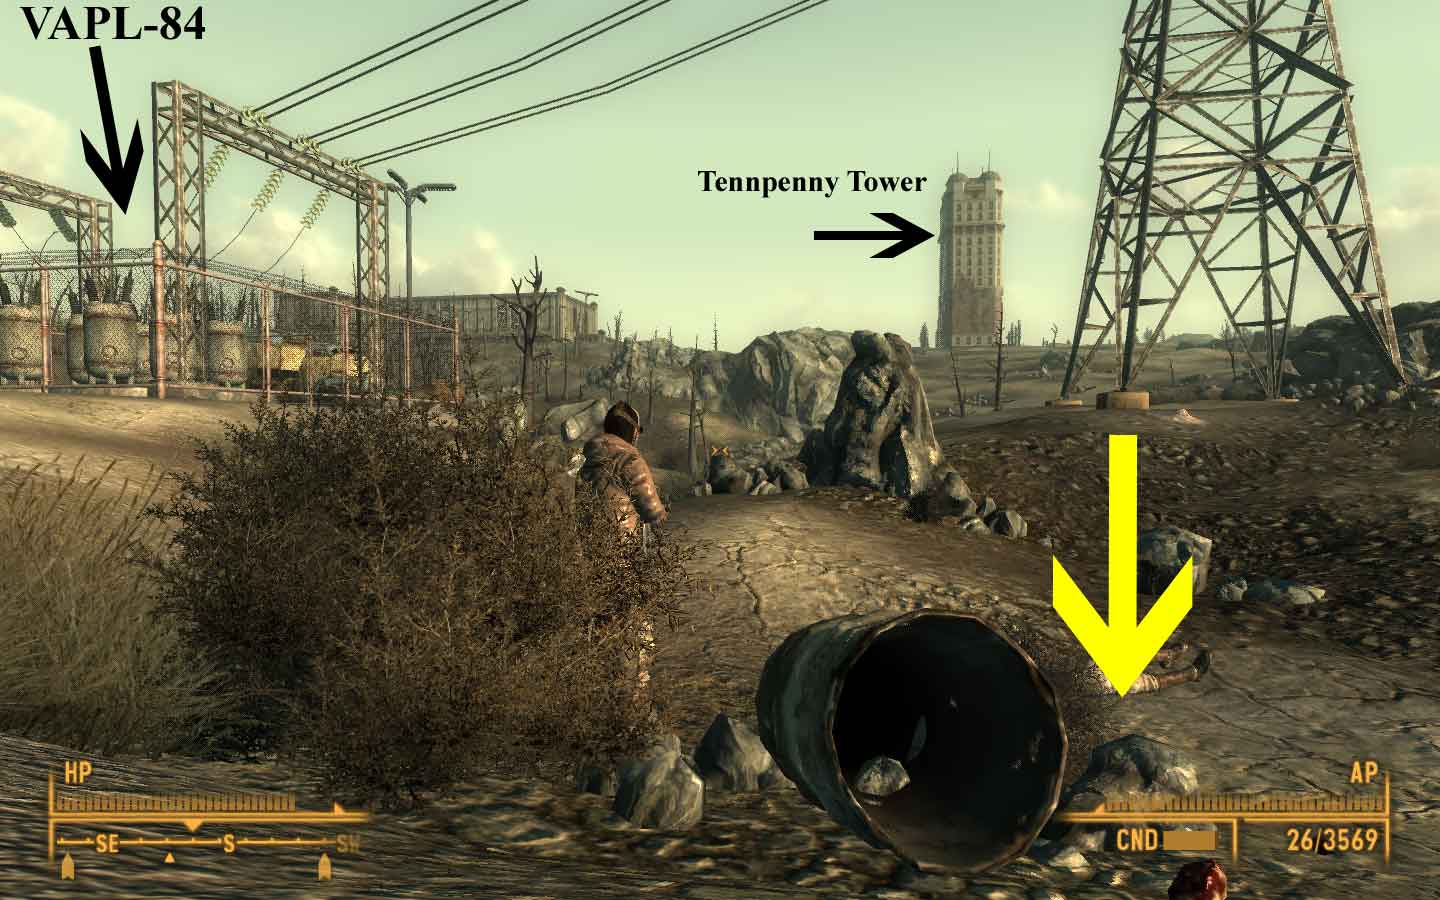 We just want to explore The Capital Wasteland again”: Meet the modders remaking  Fallout 3 inside Fallout 4